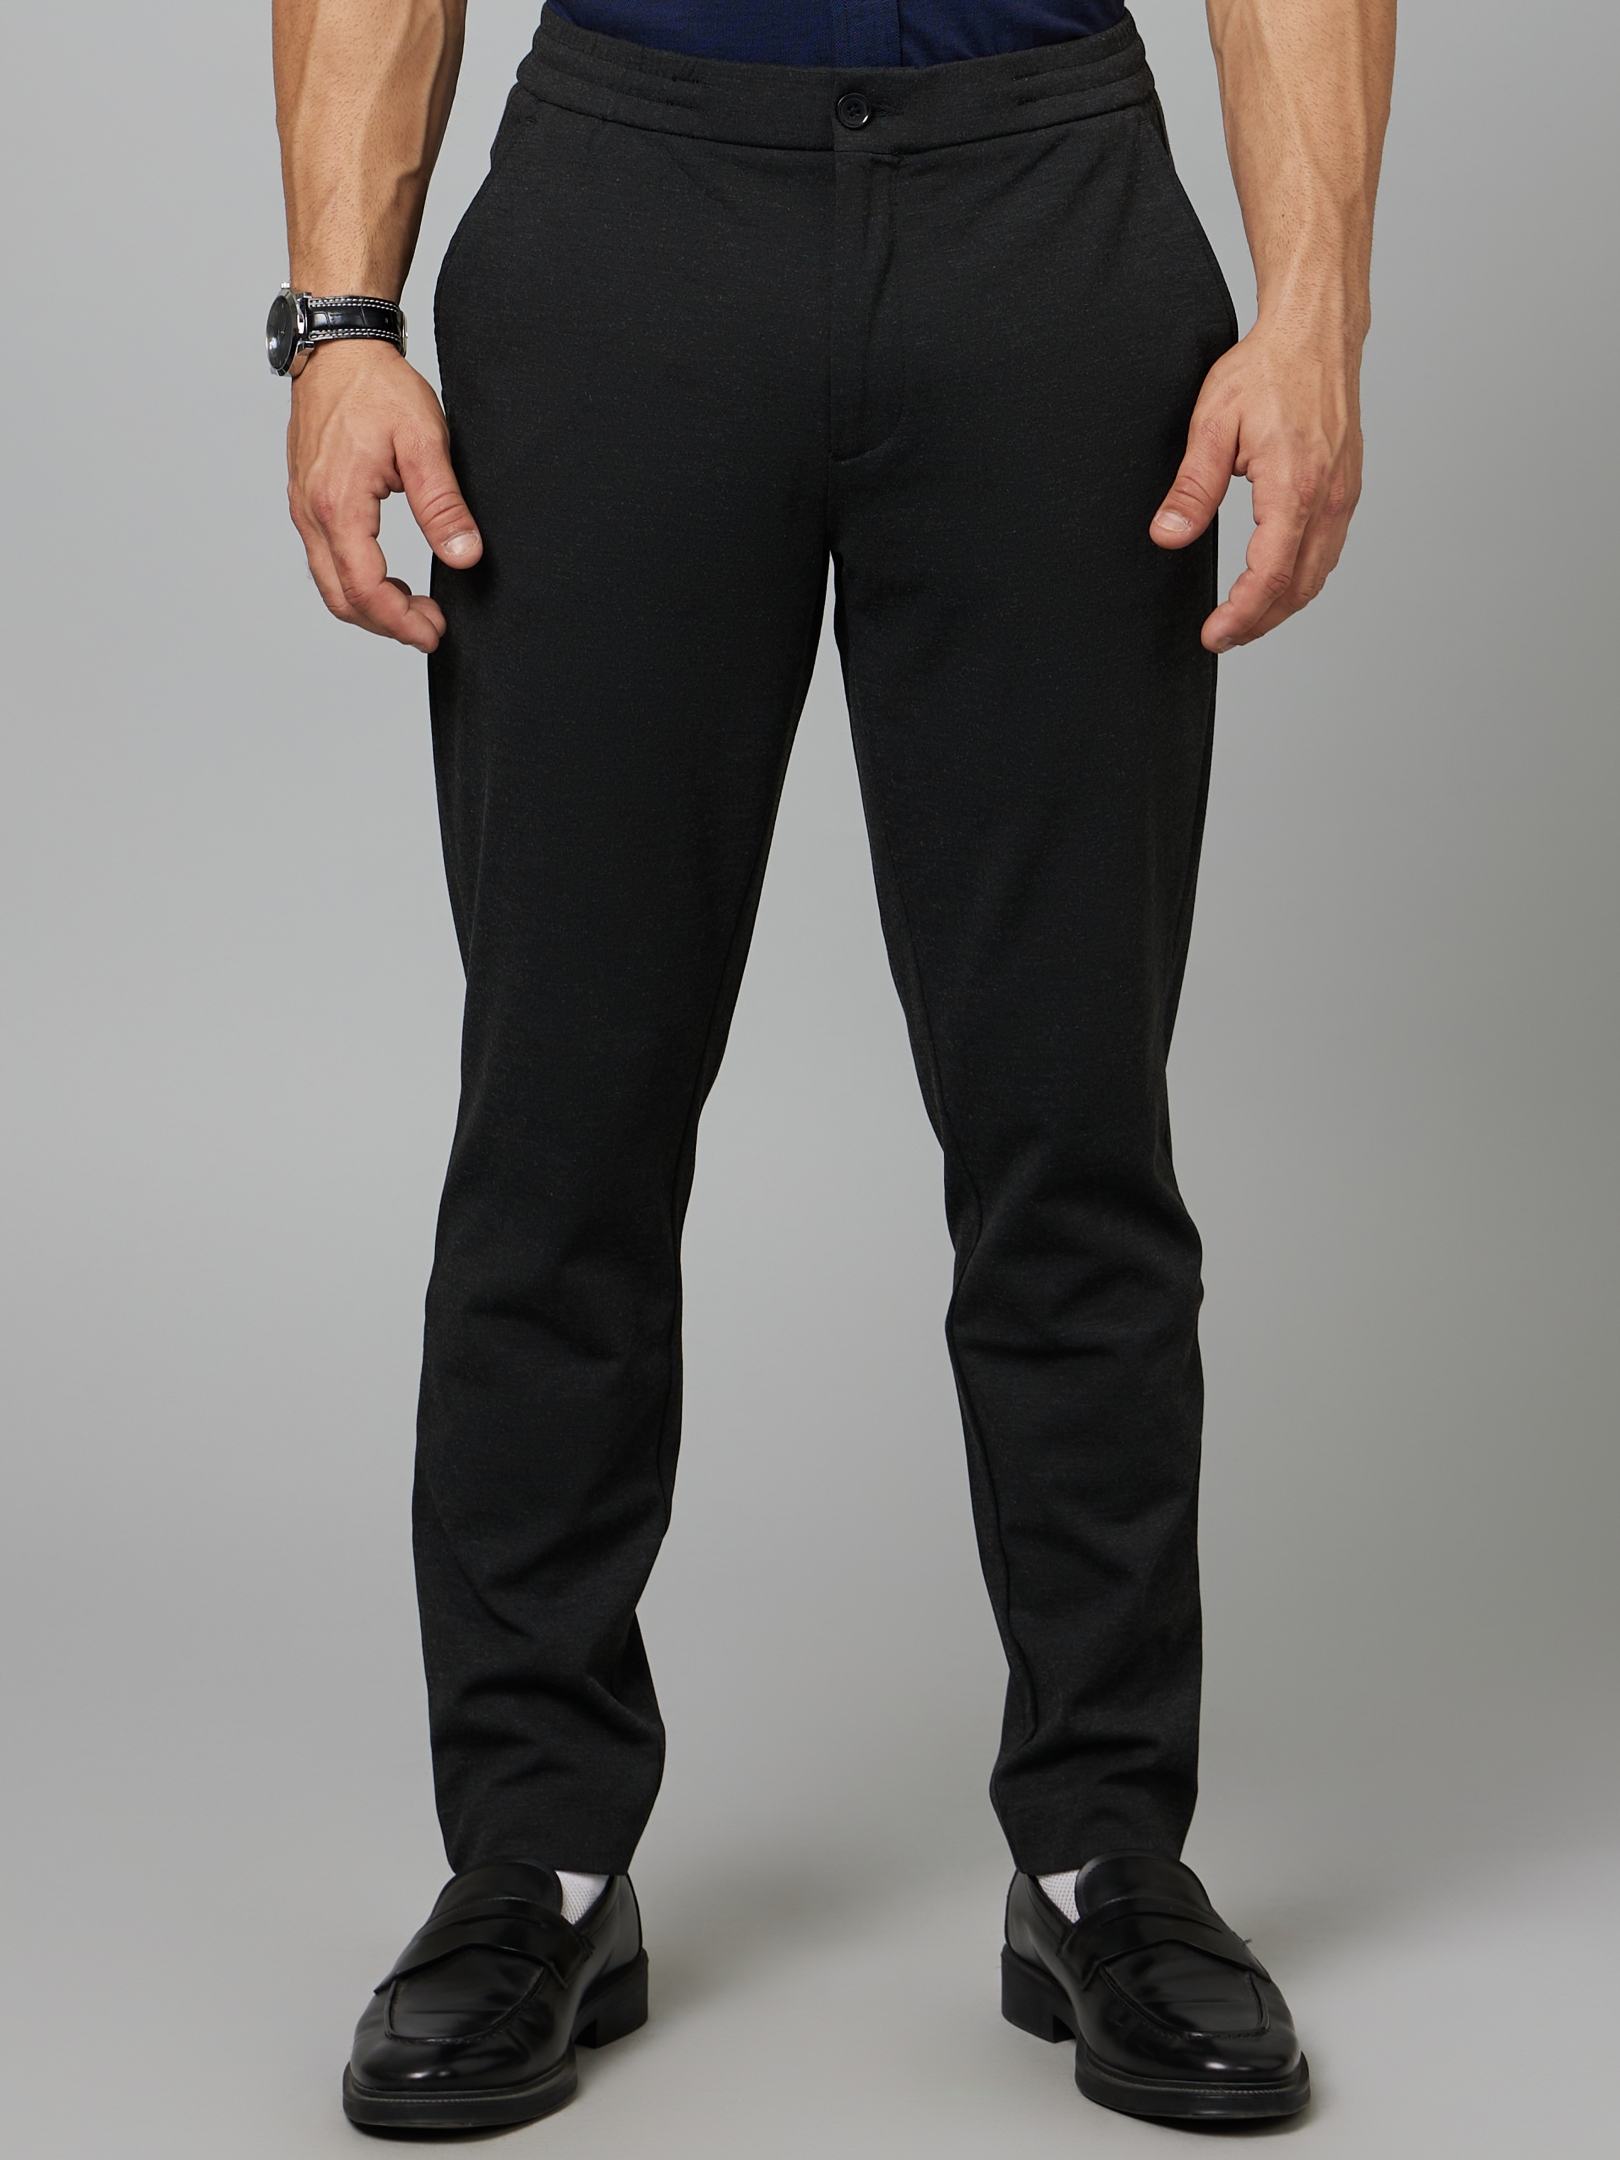 Men's Black Polyester Solid Trousers